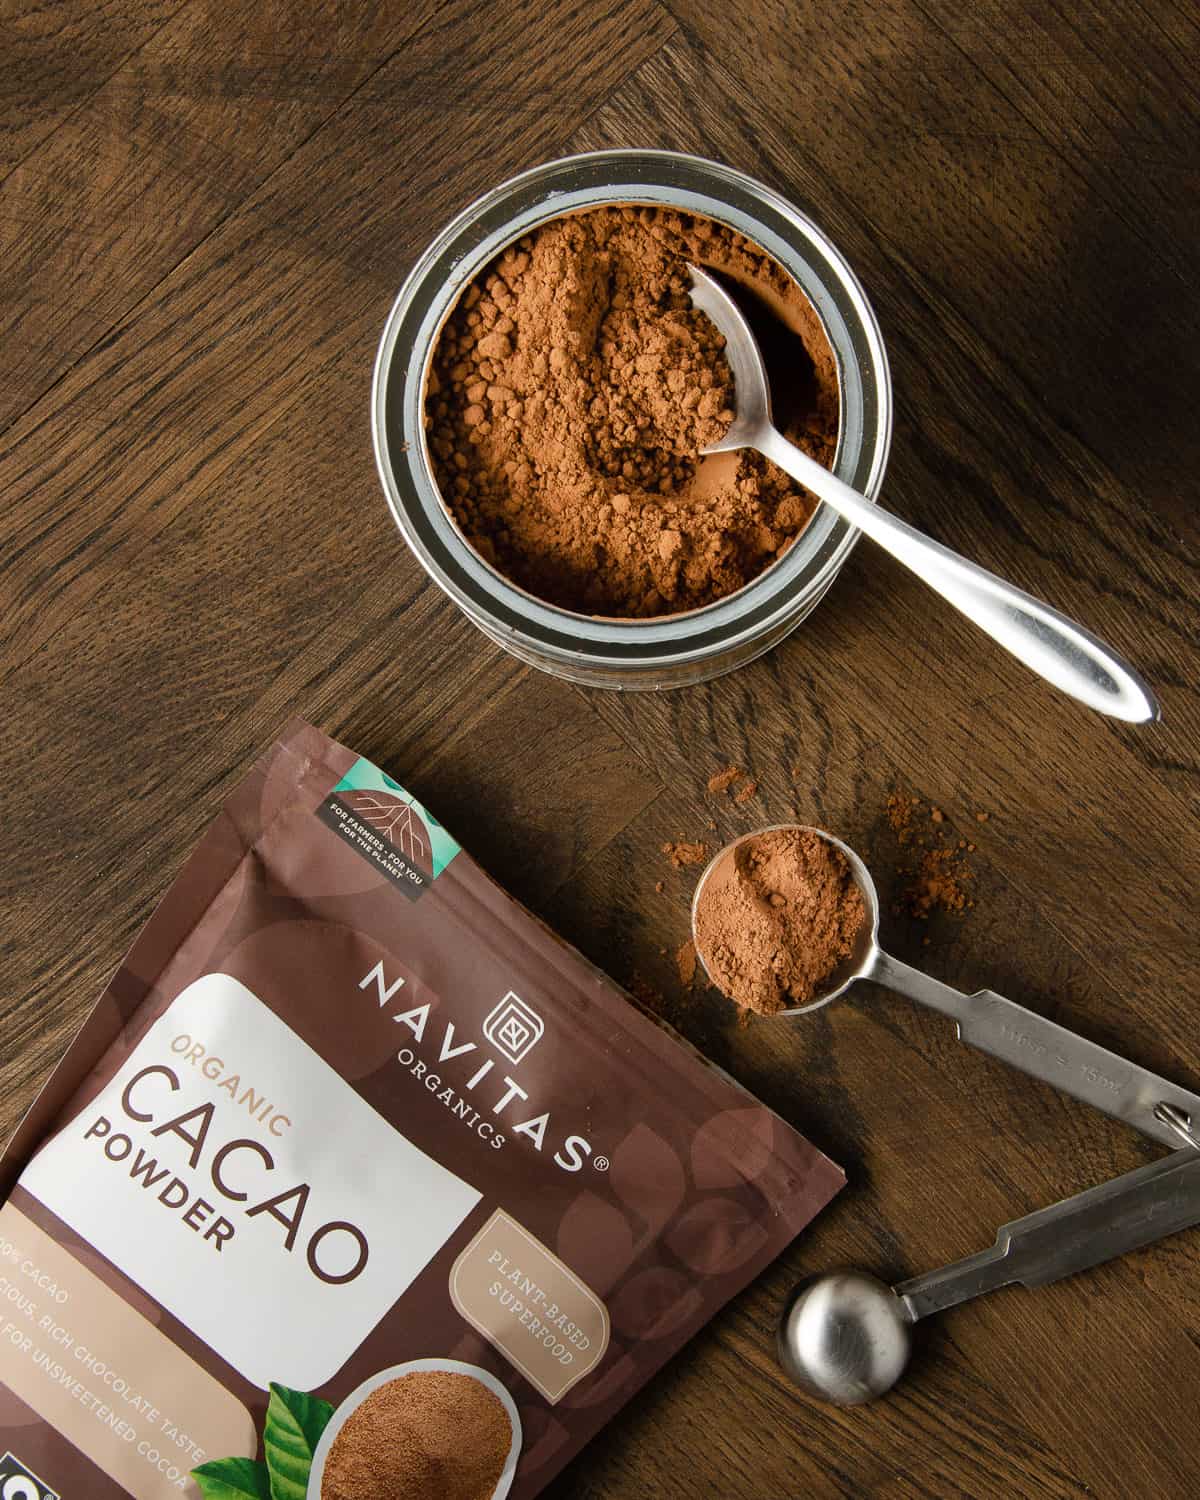 Cocoa powder and cacao powder on a wooden table.